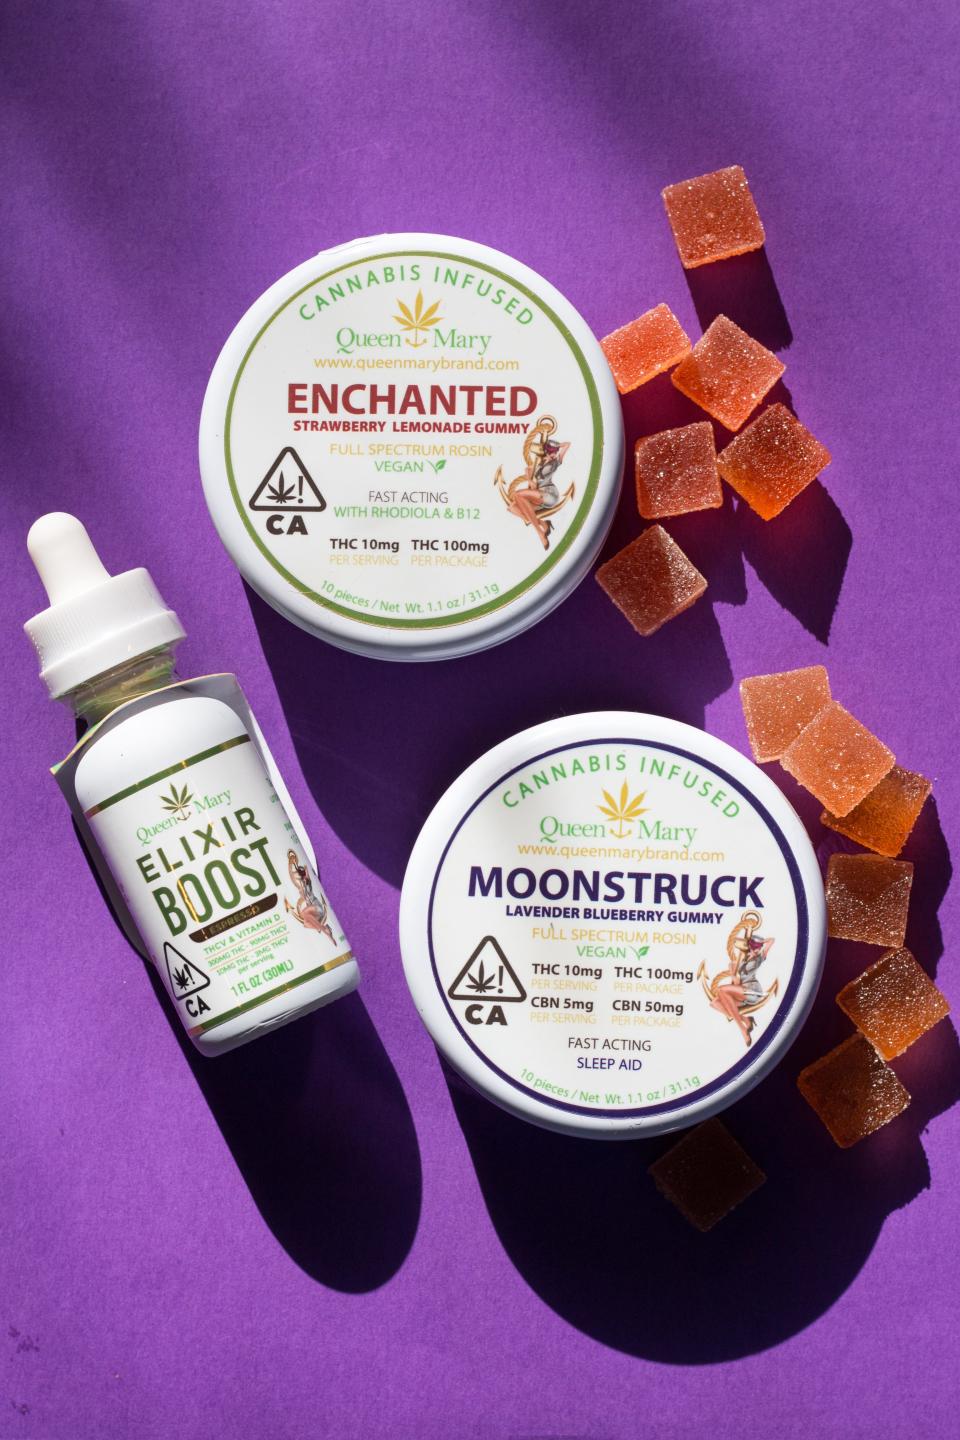 Queen Mary-cannabis infused products will soon be on Pueblo shelves after founder Tiana Woodruff, a former Puebloan, was awarded a state social equity grant for the business.